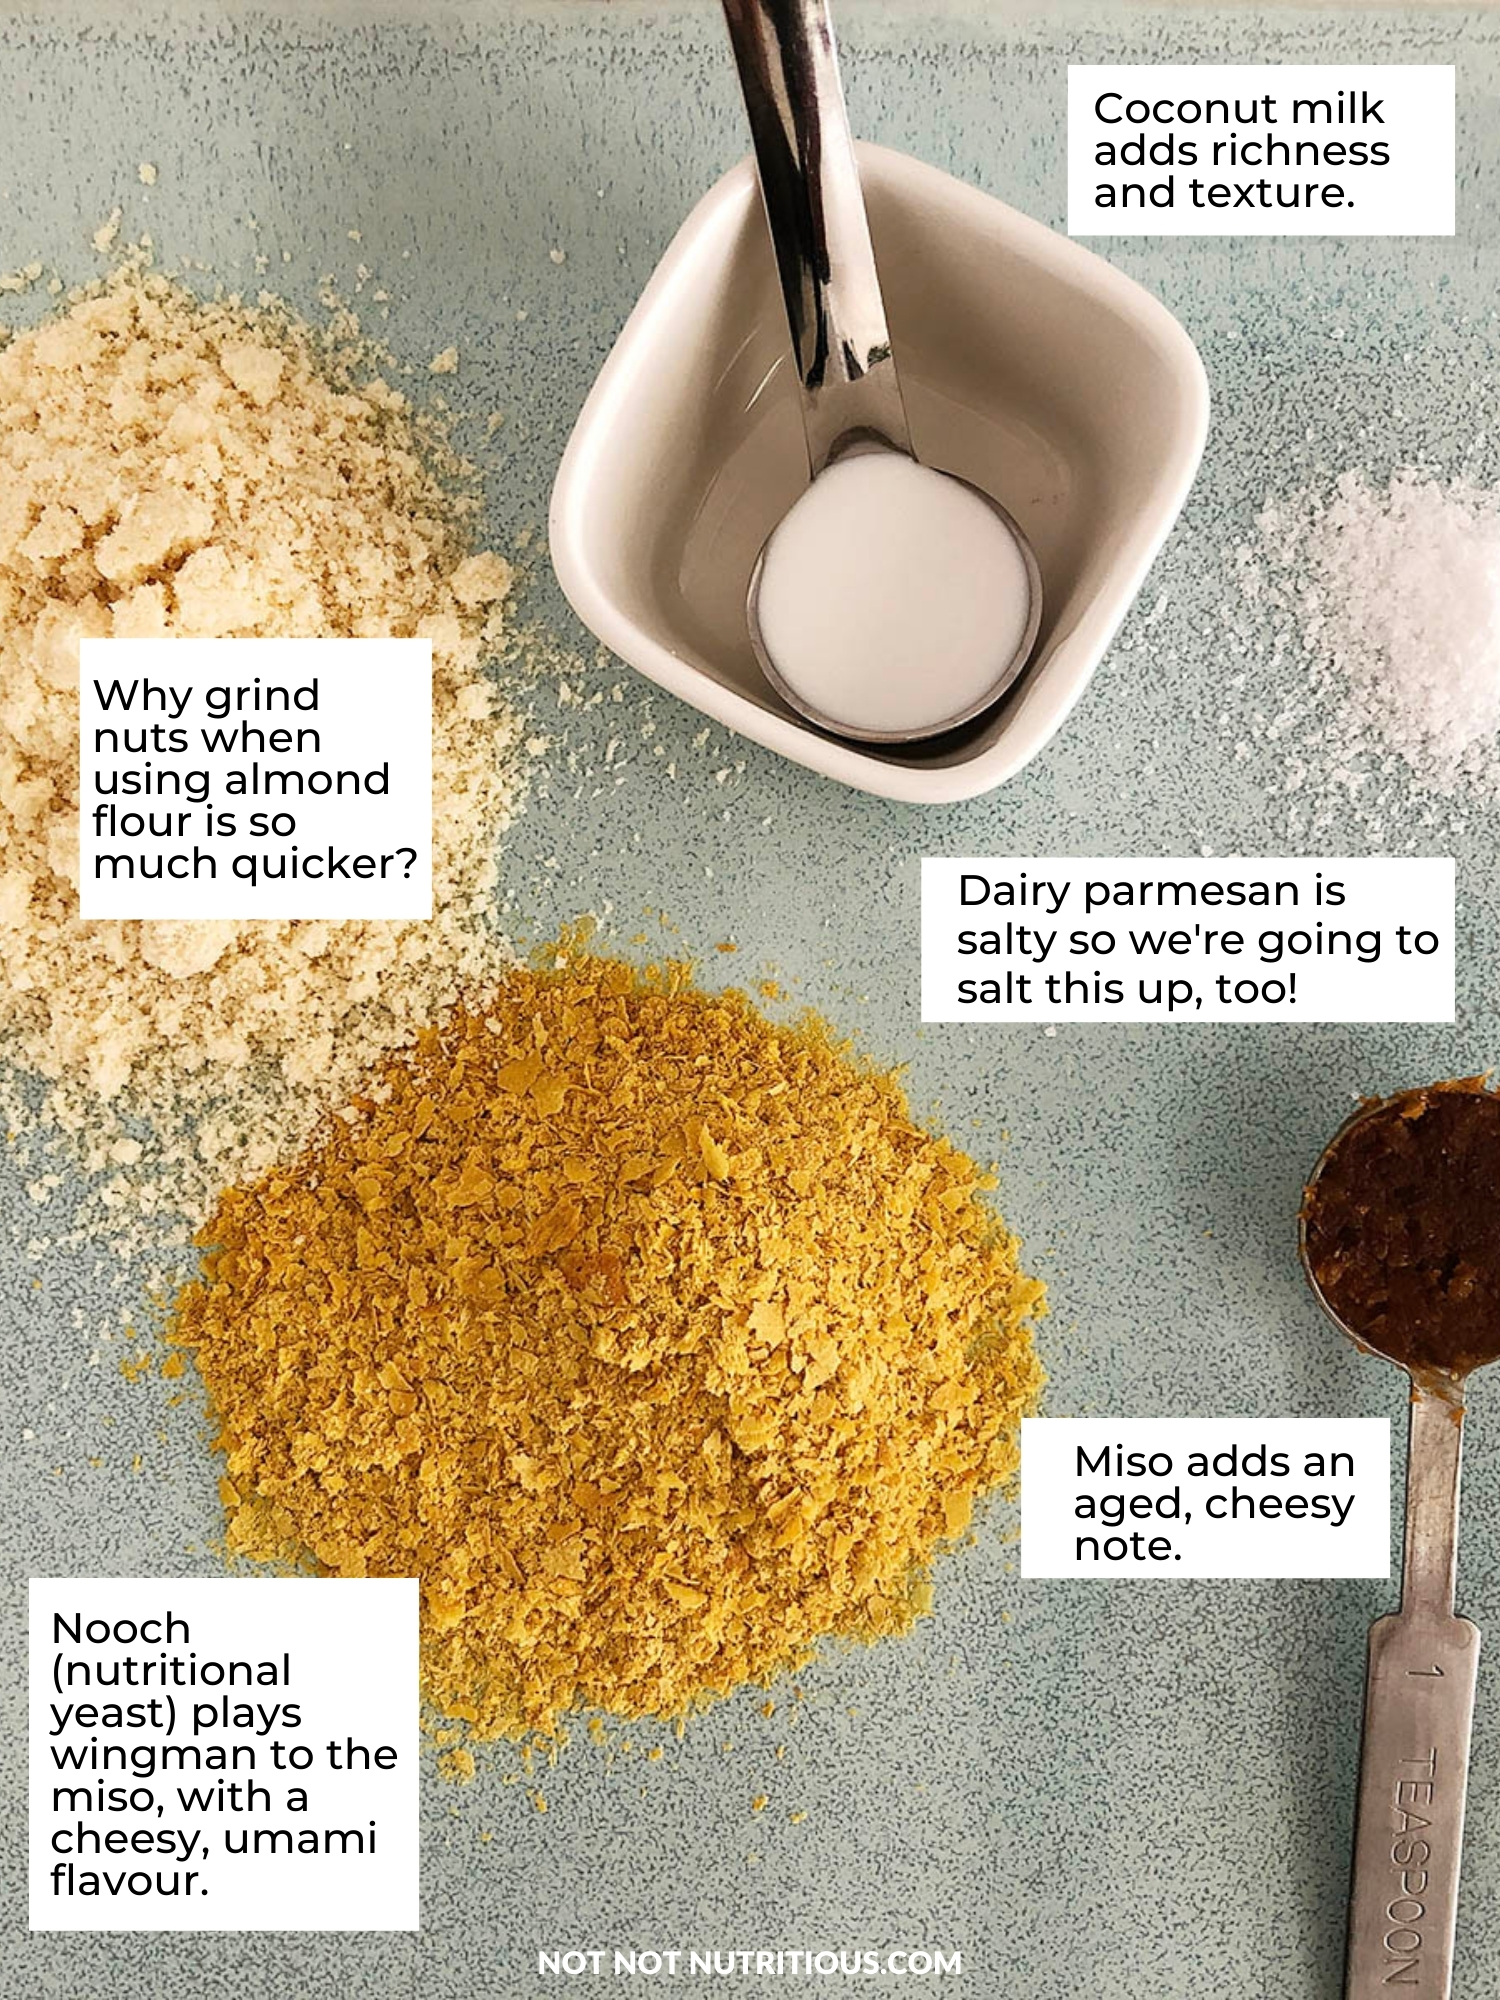 Infographic: The Lowdown on 1-Minute Plant-Based Parmesan. Image shows each of the ingredients with text comments. Coconut milk adds richness and texture.  Dairy parmesan is salty so we're going to salt this up too! Miso adds an aged, cheesy note. Nooch (nutritional yeast) plays wingman to the miso, with a cheesy, unami flavor. Why grind nuts when almond flour is so much quicker?